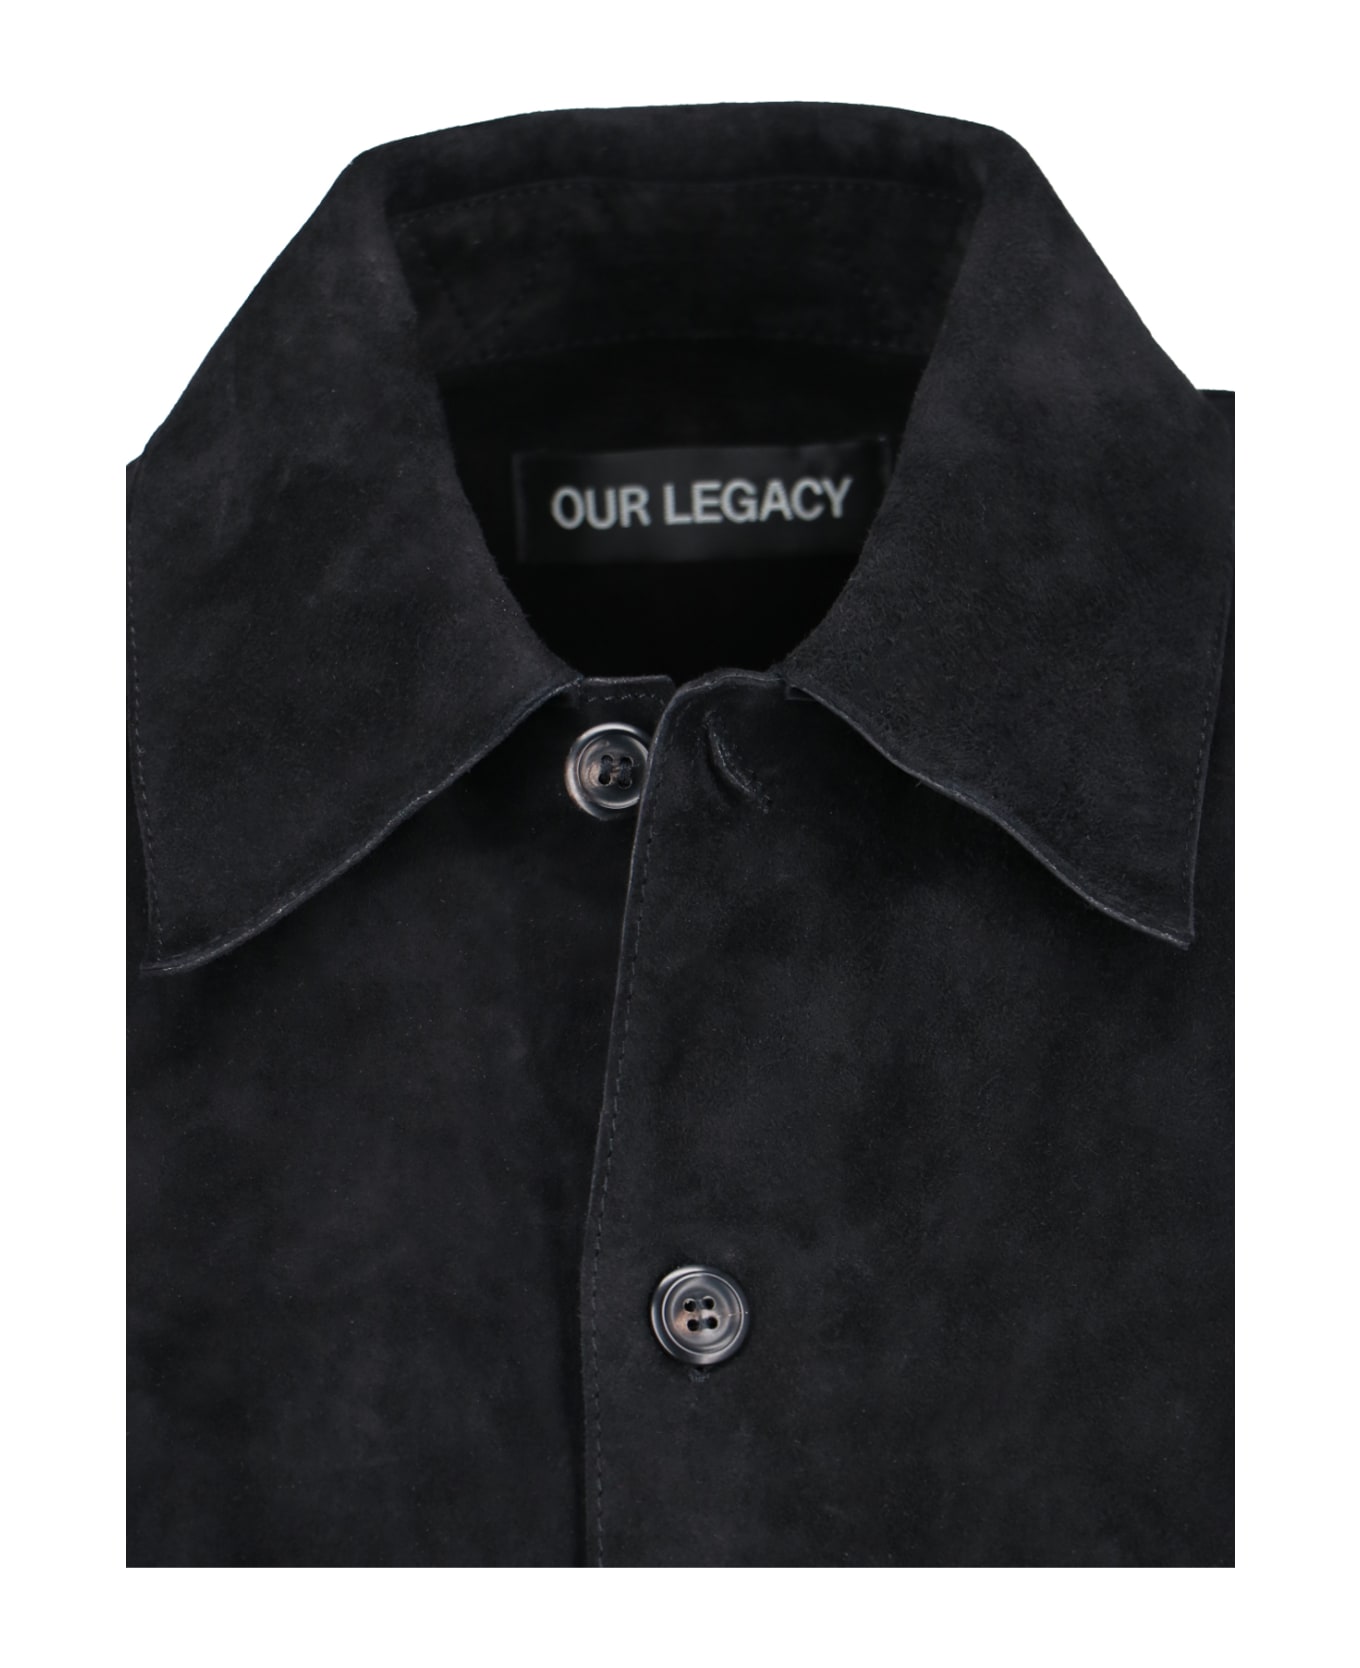 Our Legacy Suede Shirt - Black   シャツ